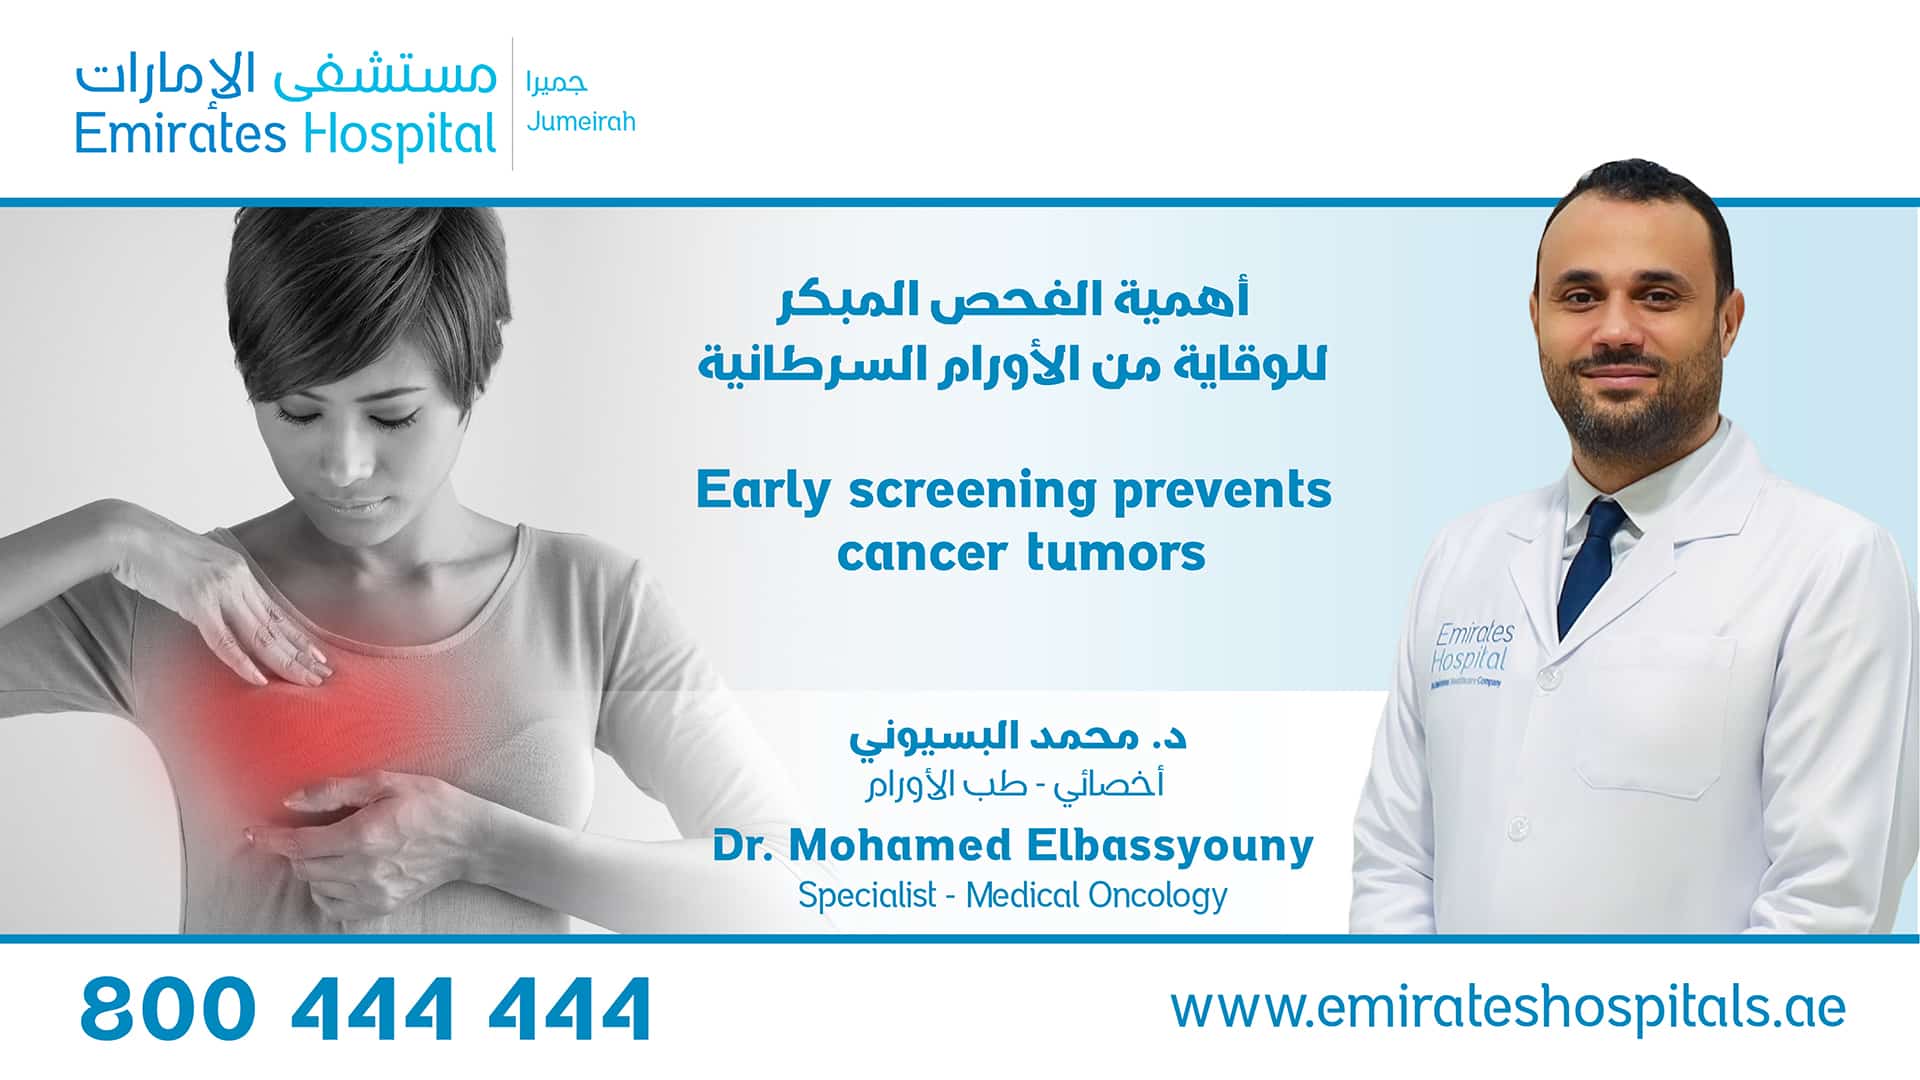 Early Screening prevents cancer tumors - Dr. Mohamed Elbassyouny